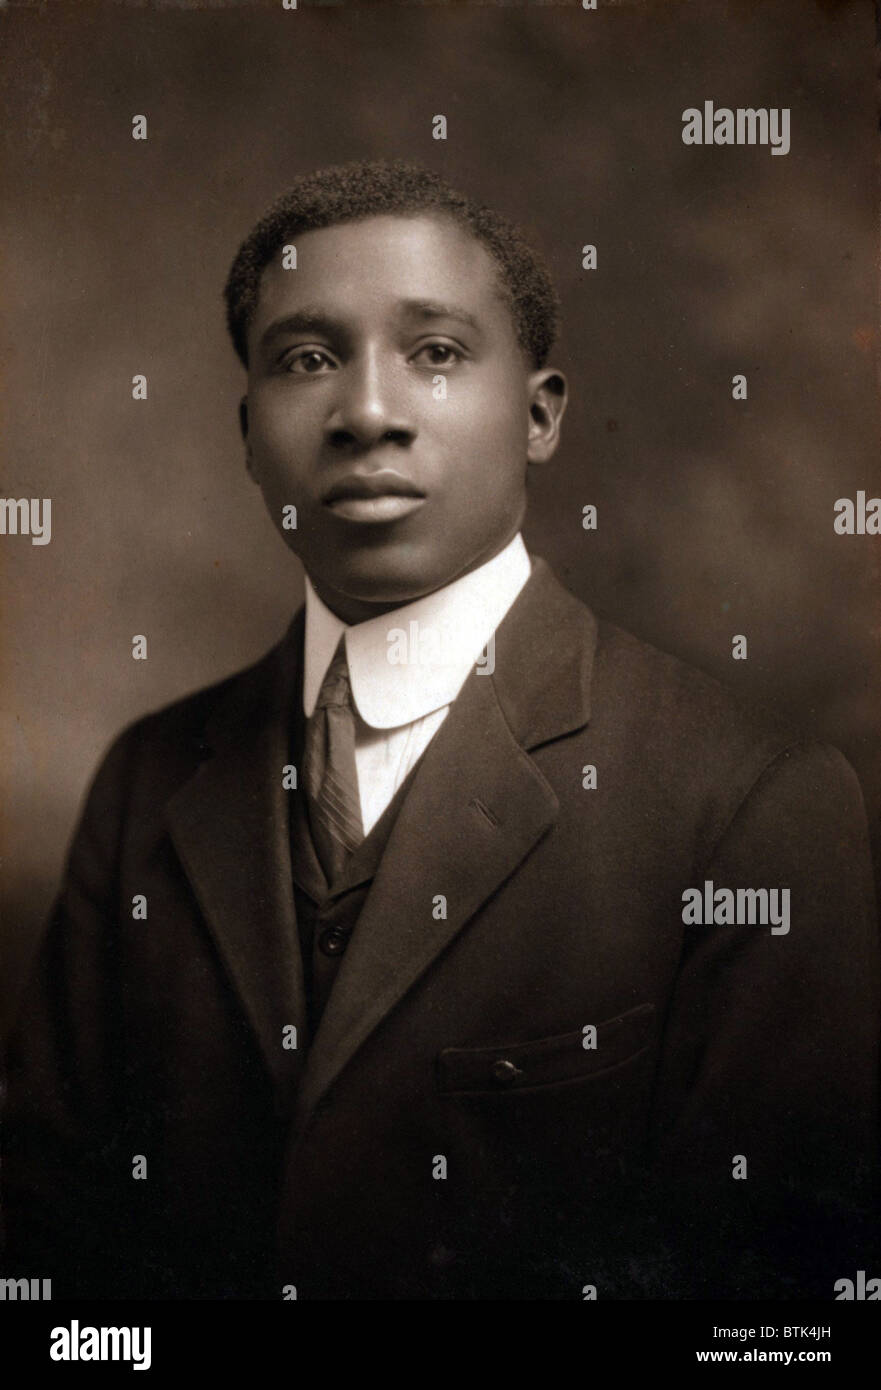 Nathaniel R. Dett (1882-1943), African American composer and choral director, best known for his numerous arrangements of folksongs and spirituals, written for the nationally admired, Hampton Institute Choir. Ca. 1915. Stock Photo